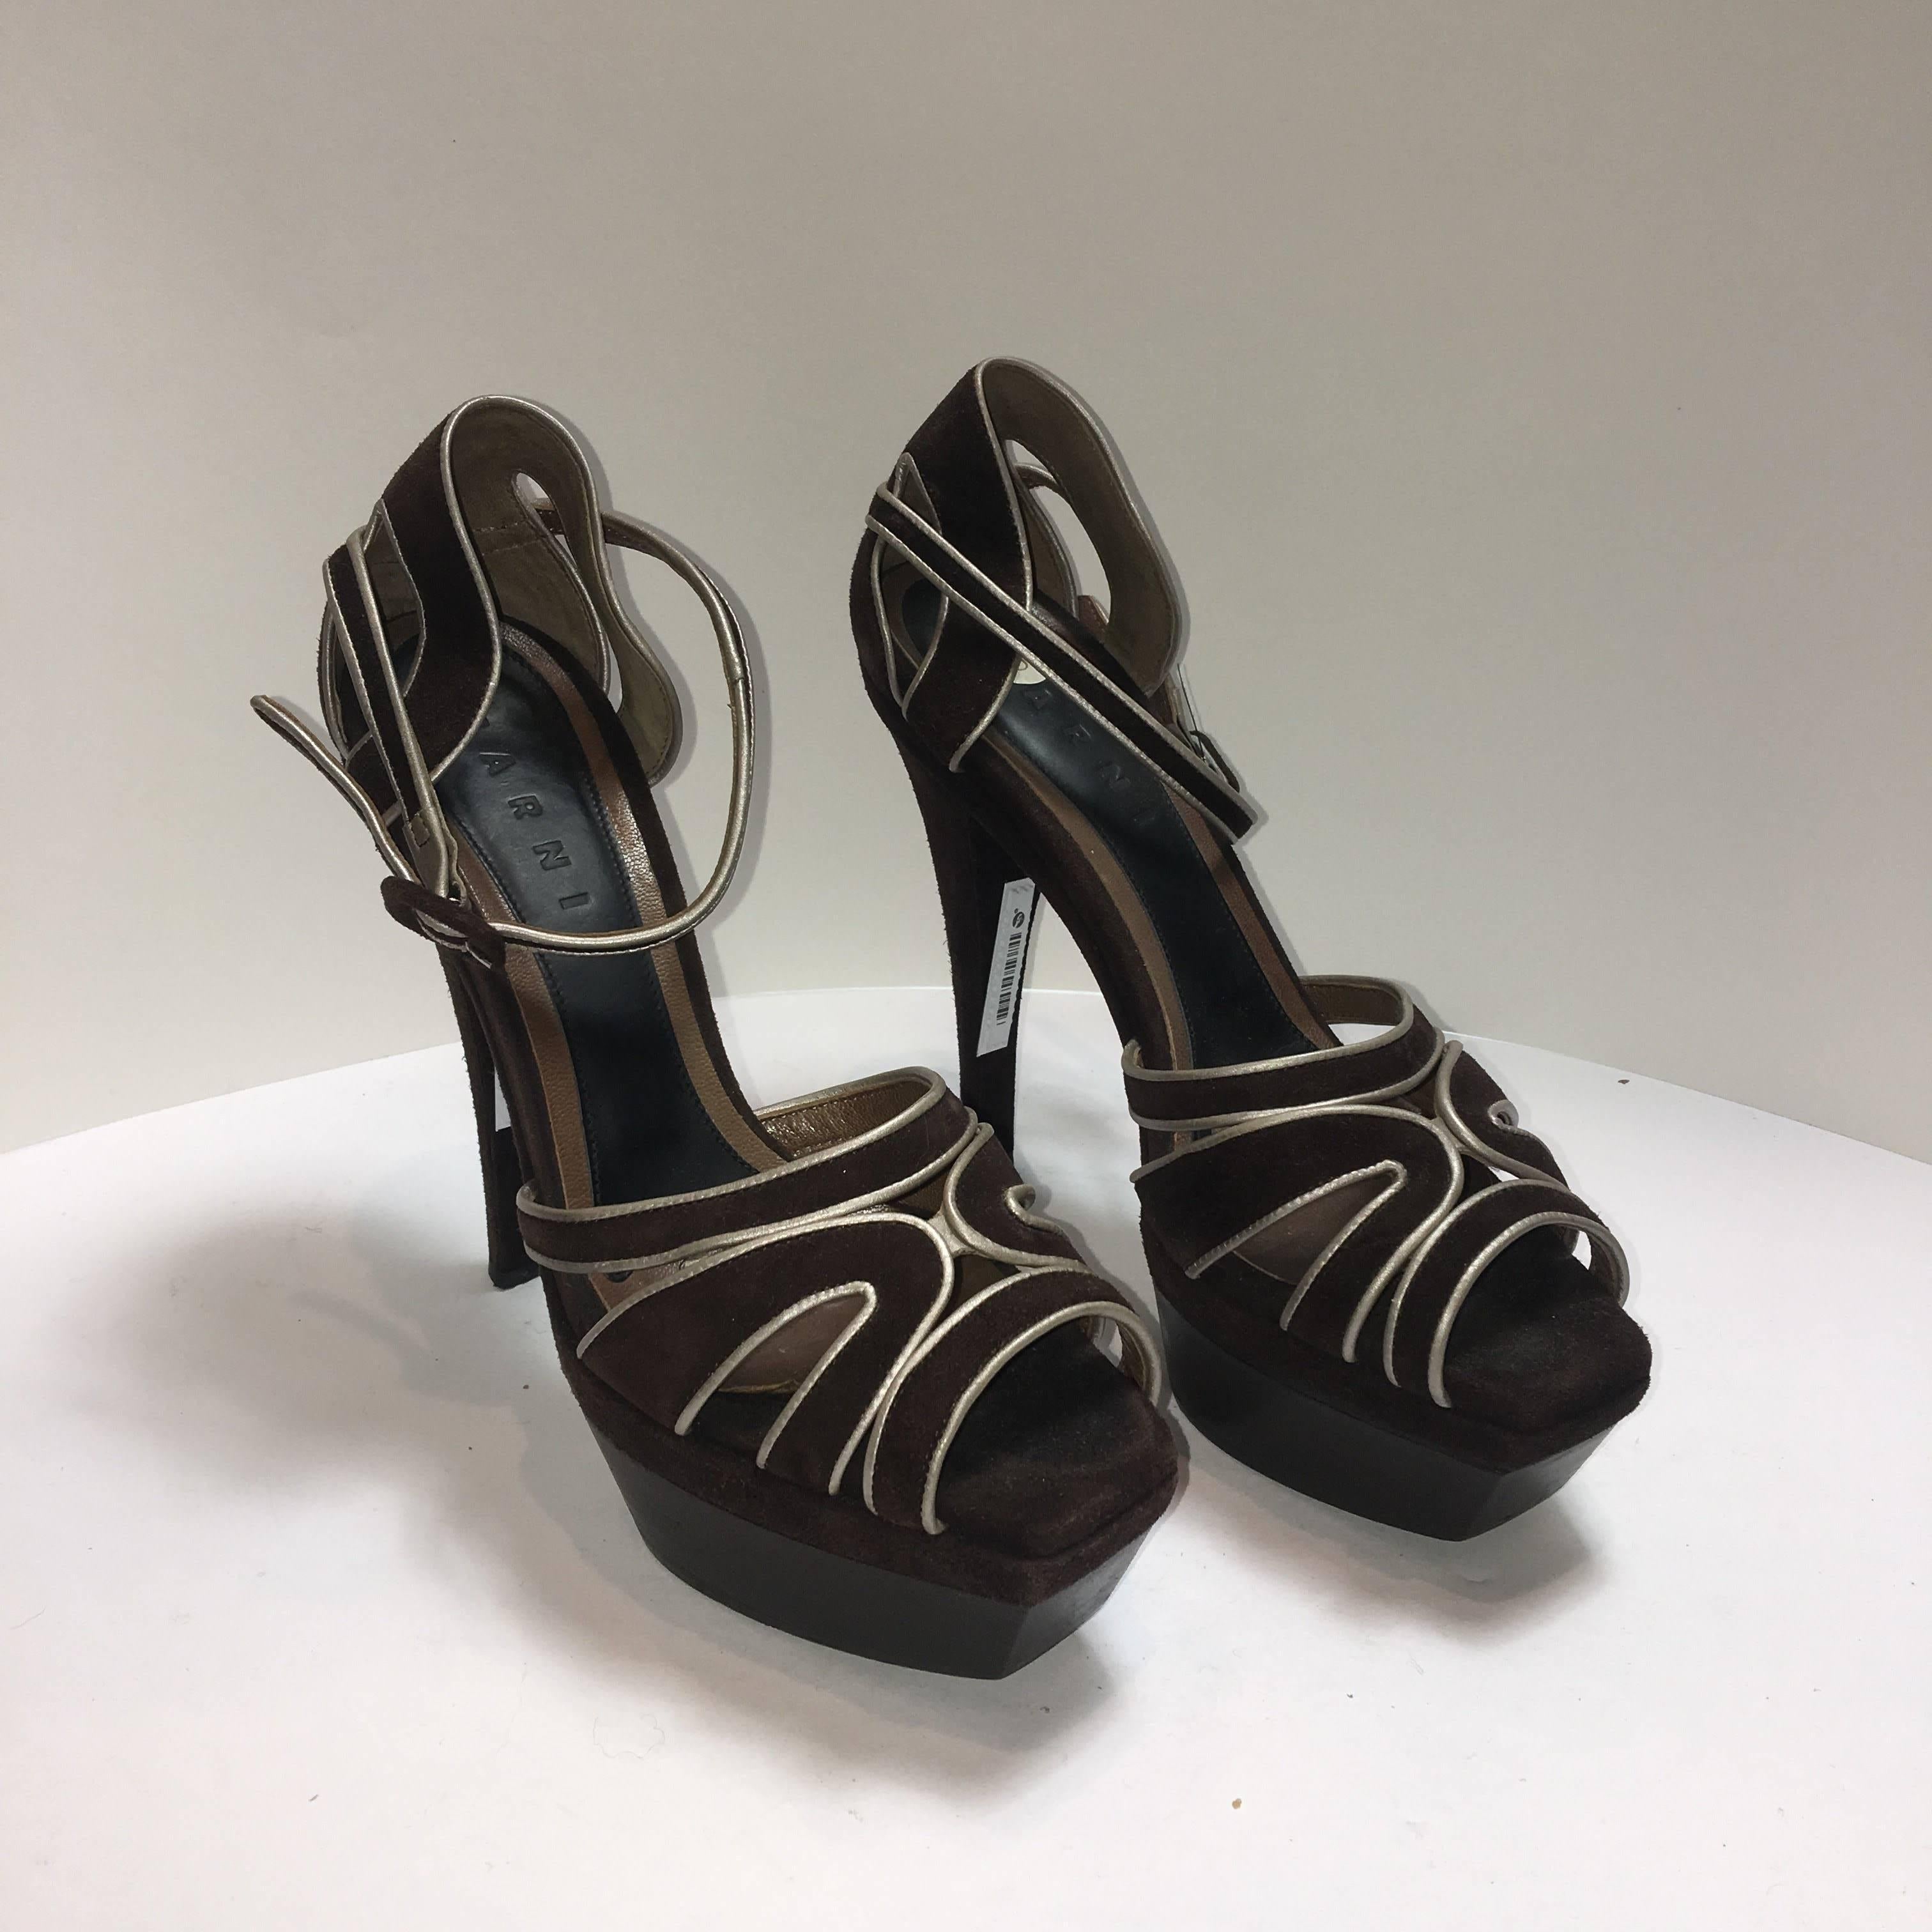 Marni Brown Suede Pumps with Silver Piping. Size 38 Peep Toe with Ankle Strap.